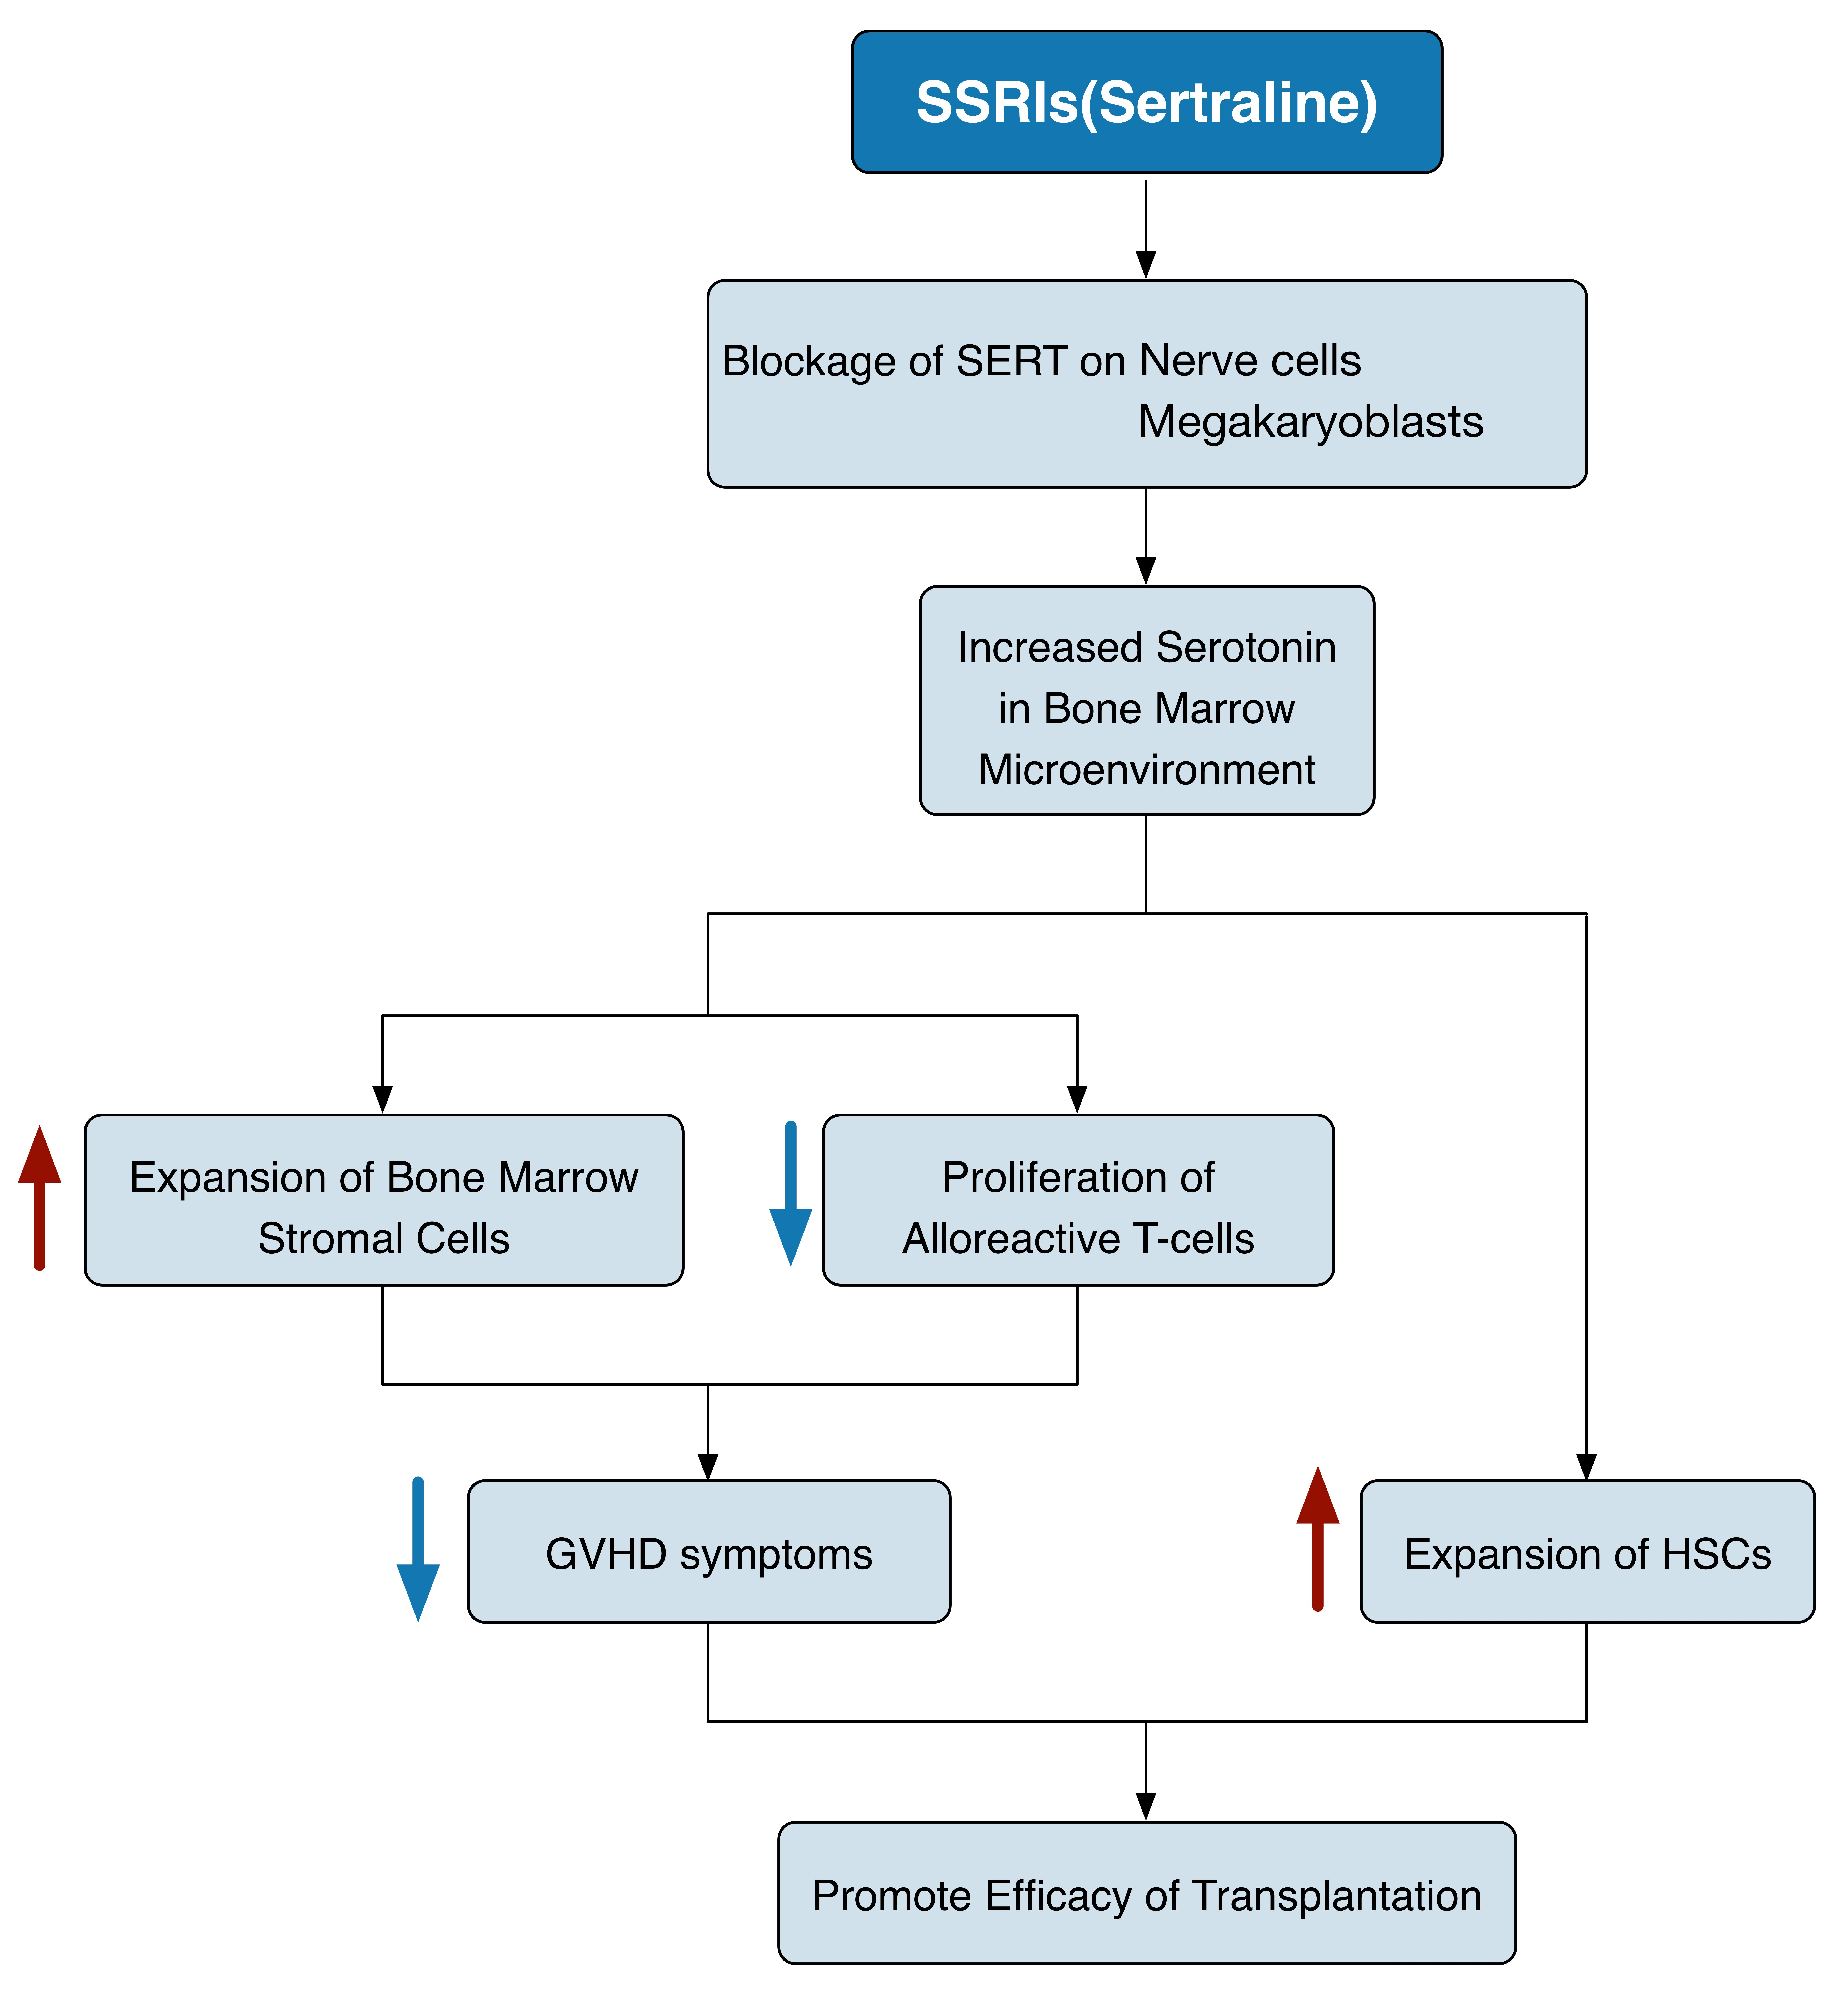 Schematic diagram of the hypothetical mechanisms underlying SSRI promotion of HSC transplantation through in vivo expansion of HSCs and decrease in GVHD.